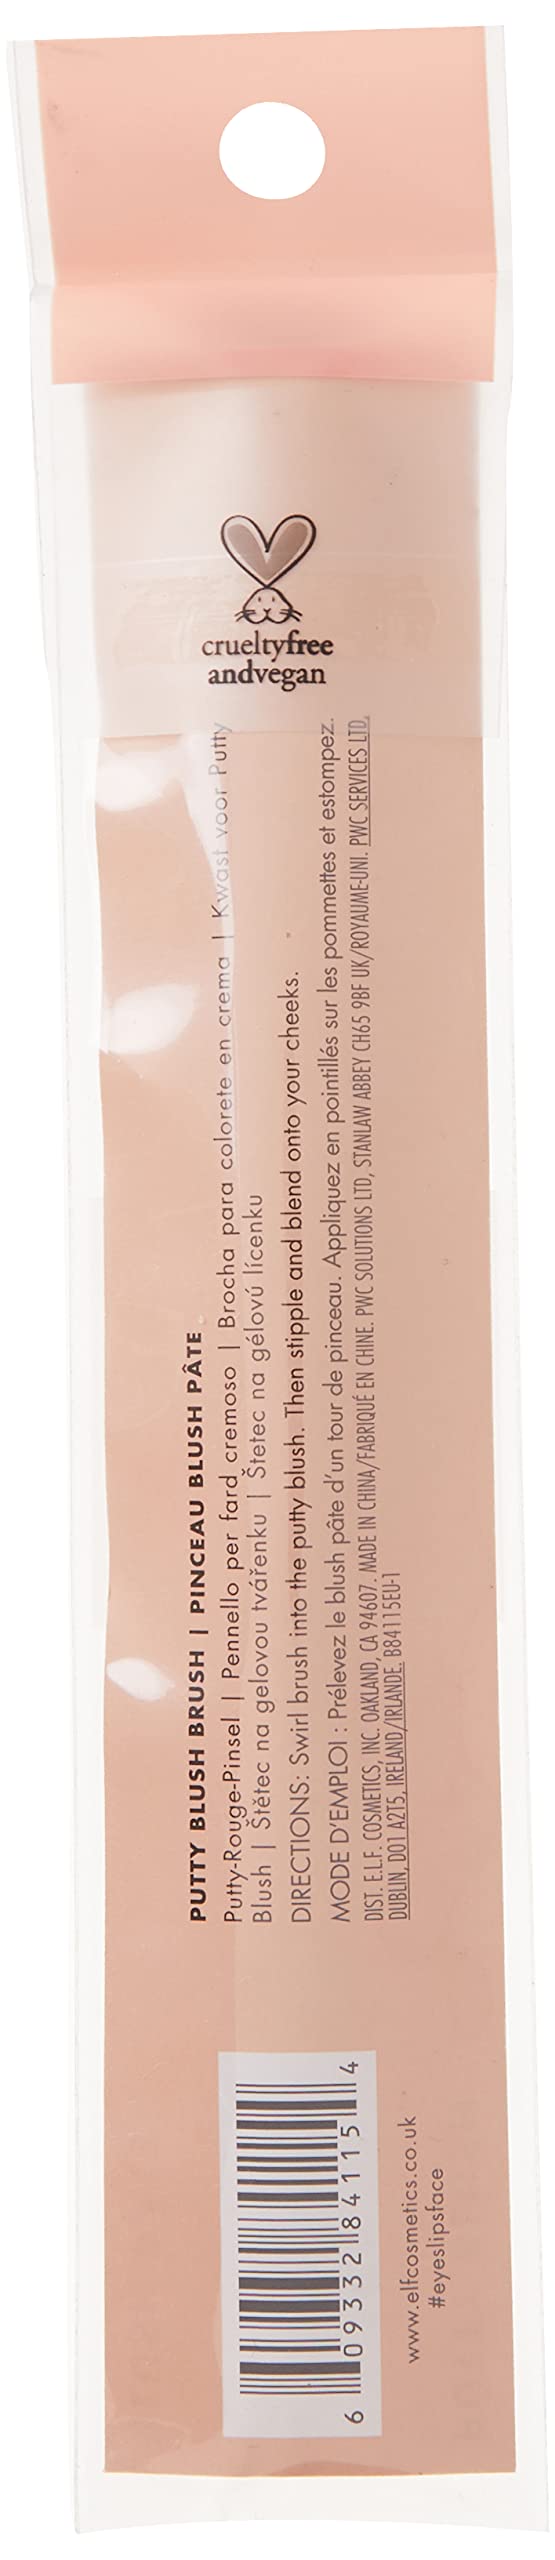 e.l.f. Putty Blush Brush, Vegan Makeup Tool, Flawlessly Applies Putty & Cream Formulas, Creates Airbrushed Effect 1 Count (Pack of 1)